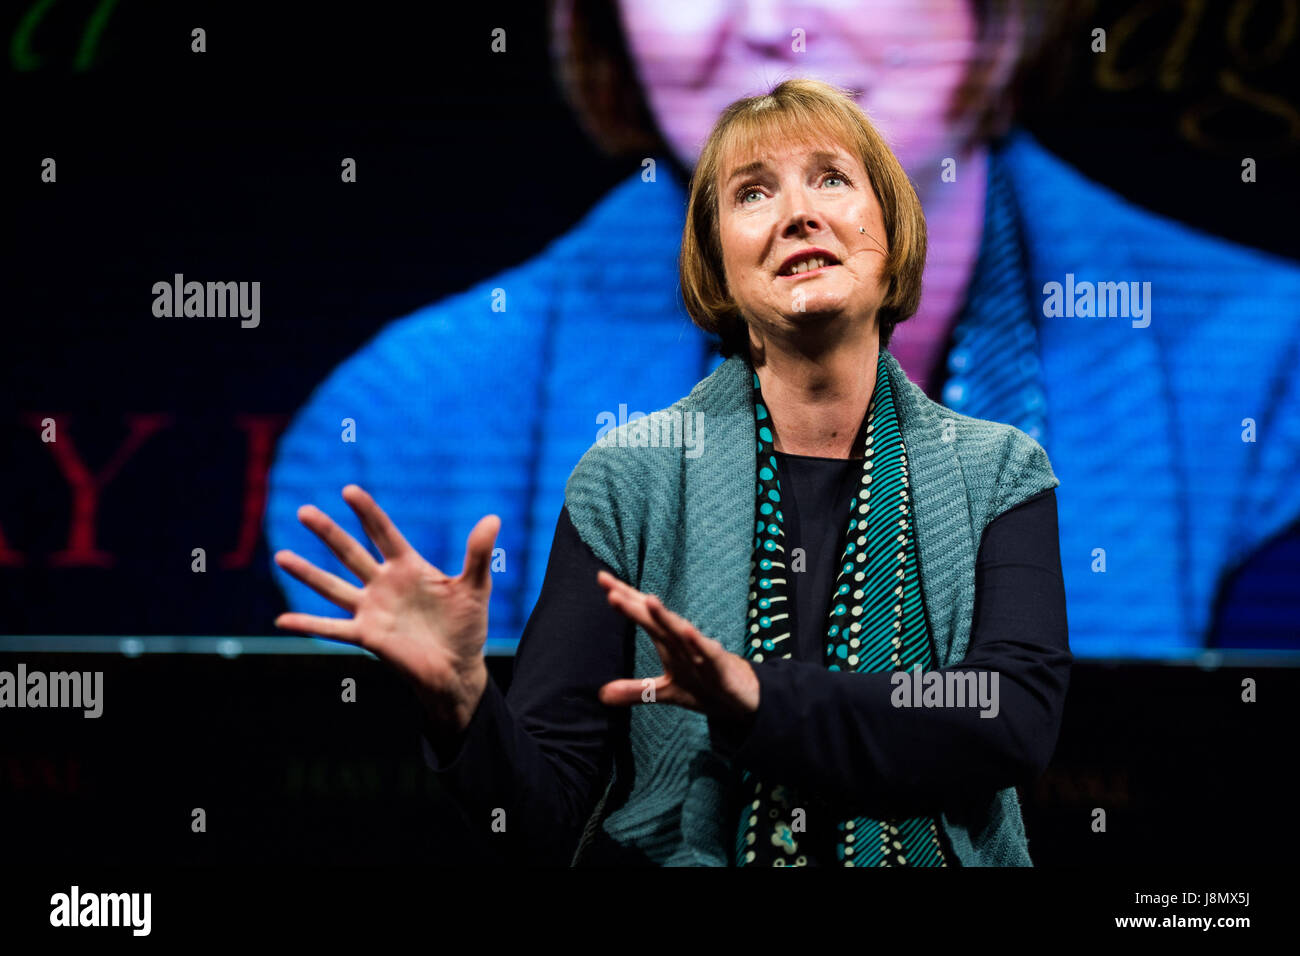 Hay Festival, Wales UK, Monday 29 May 2017 Former leading Labour politician HARRIET HARMAN talking about her life and work at the Hay Festivl 2017 Now in its 30th year, the festival draws tens of thousand of visitors a day to what was described by former US president Bill Clinton as 'the woodstock of the mind' Photo credit Credit: keith morris/Alamy Live News Stock Photo